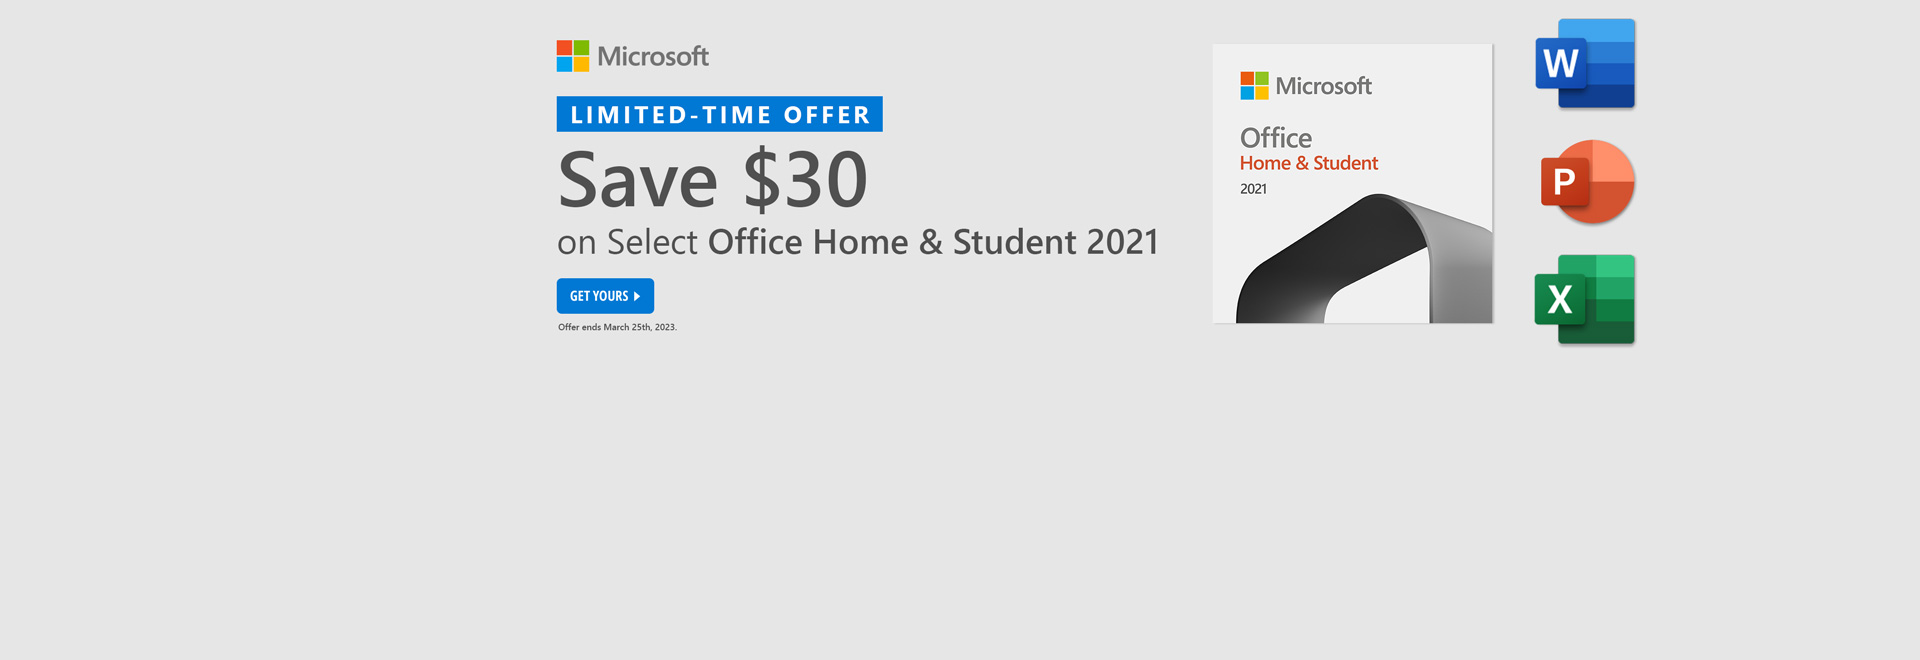 Save $30 on Select Office Home & Student 2021